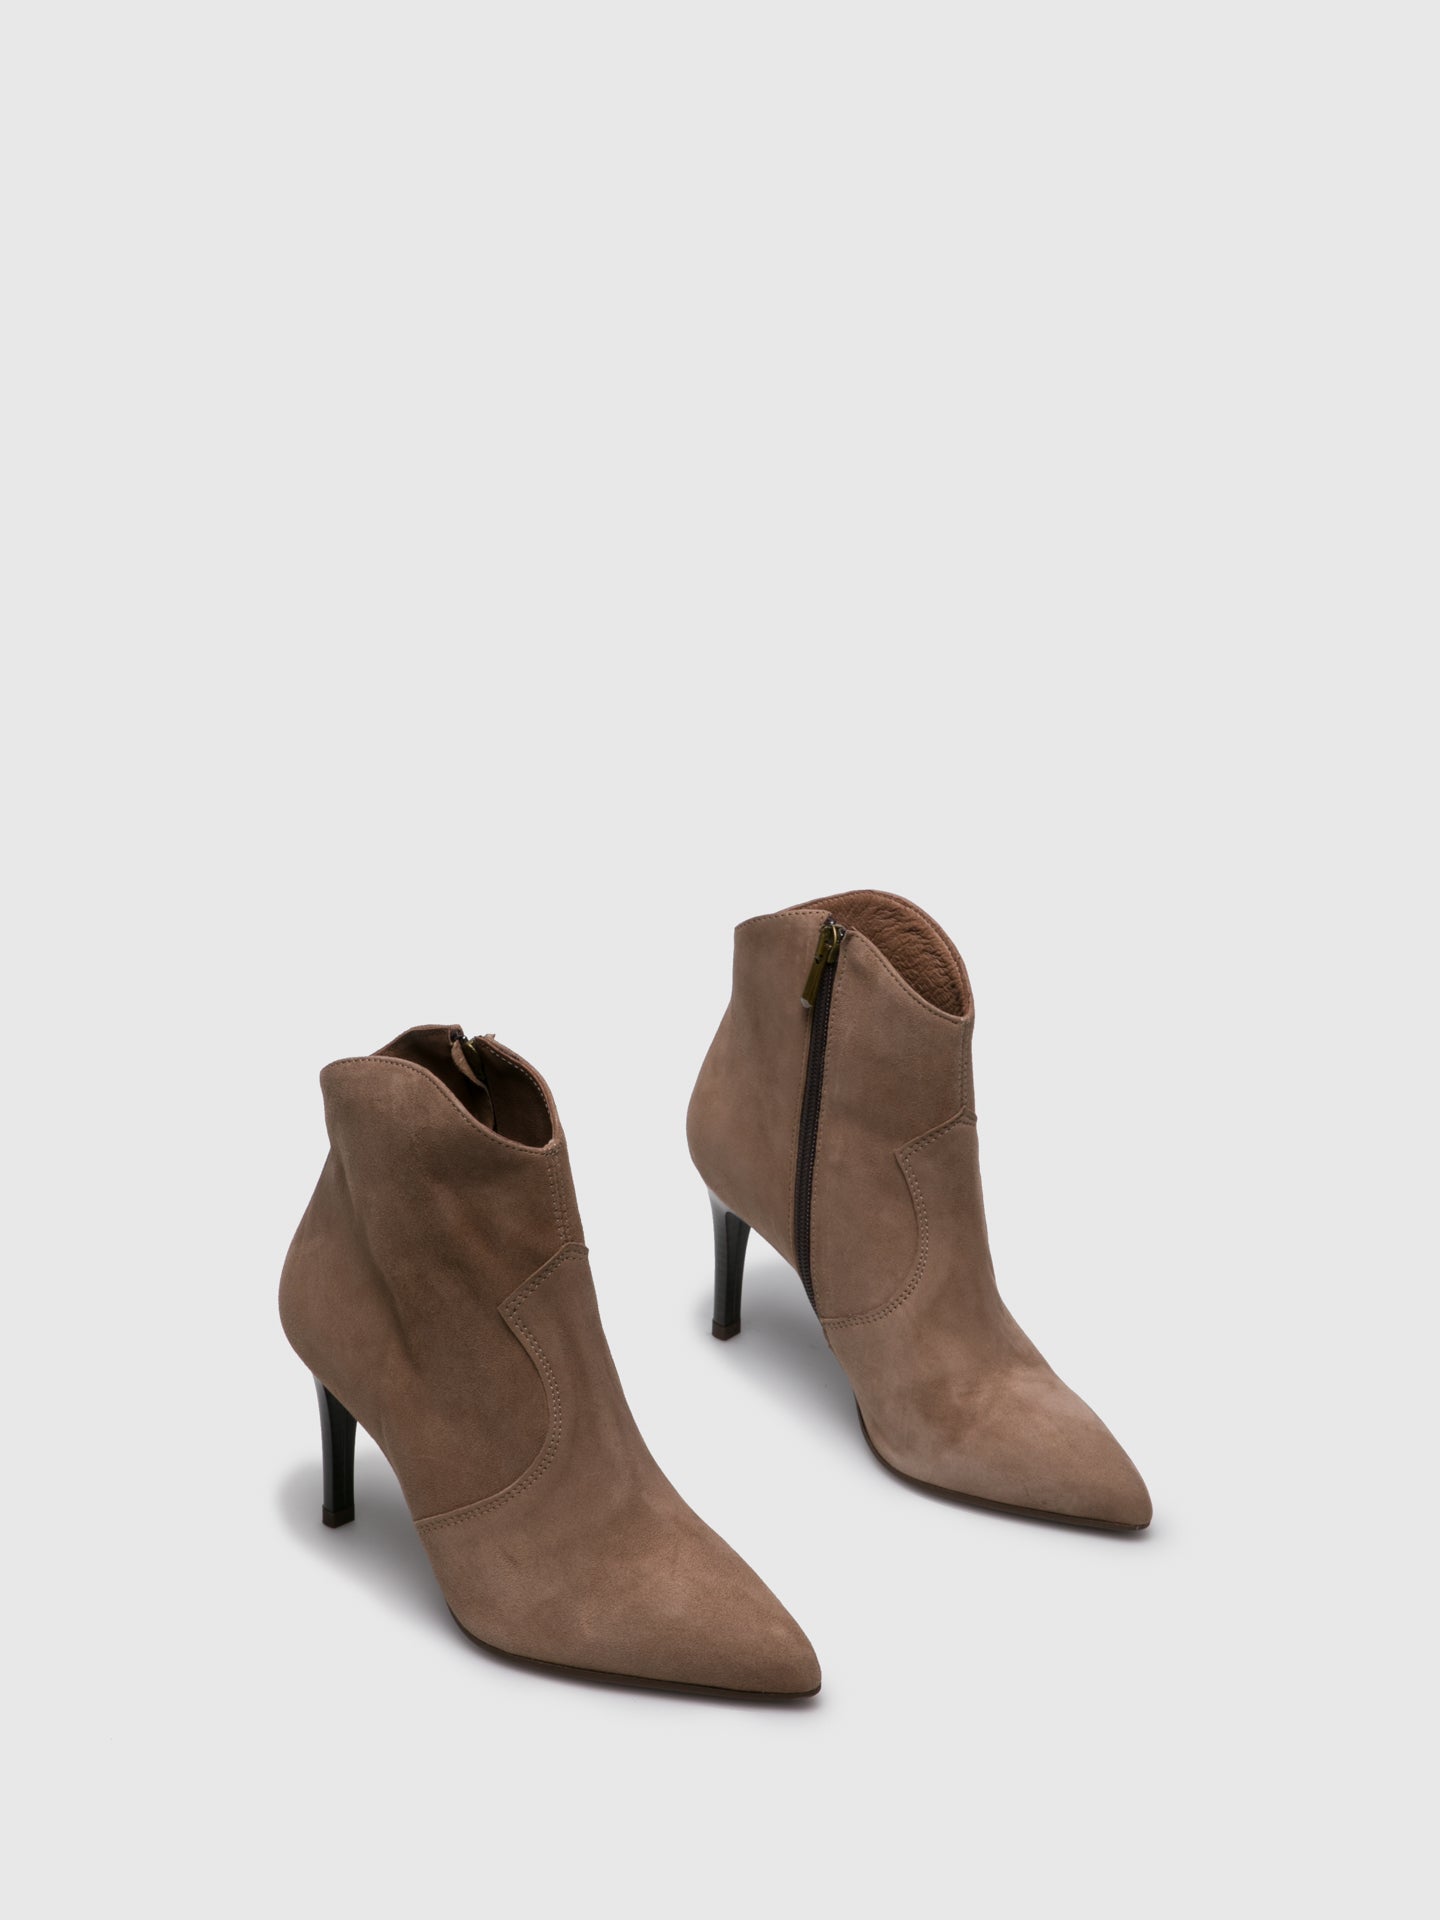 Foreva Tan Pointed Toe Ankle Boots